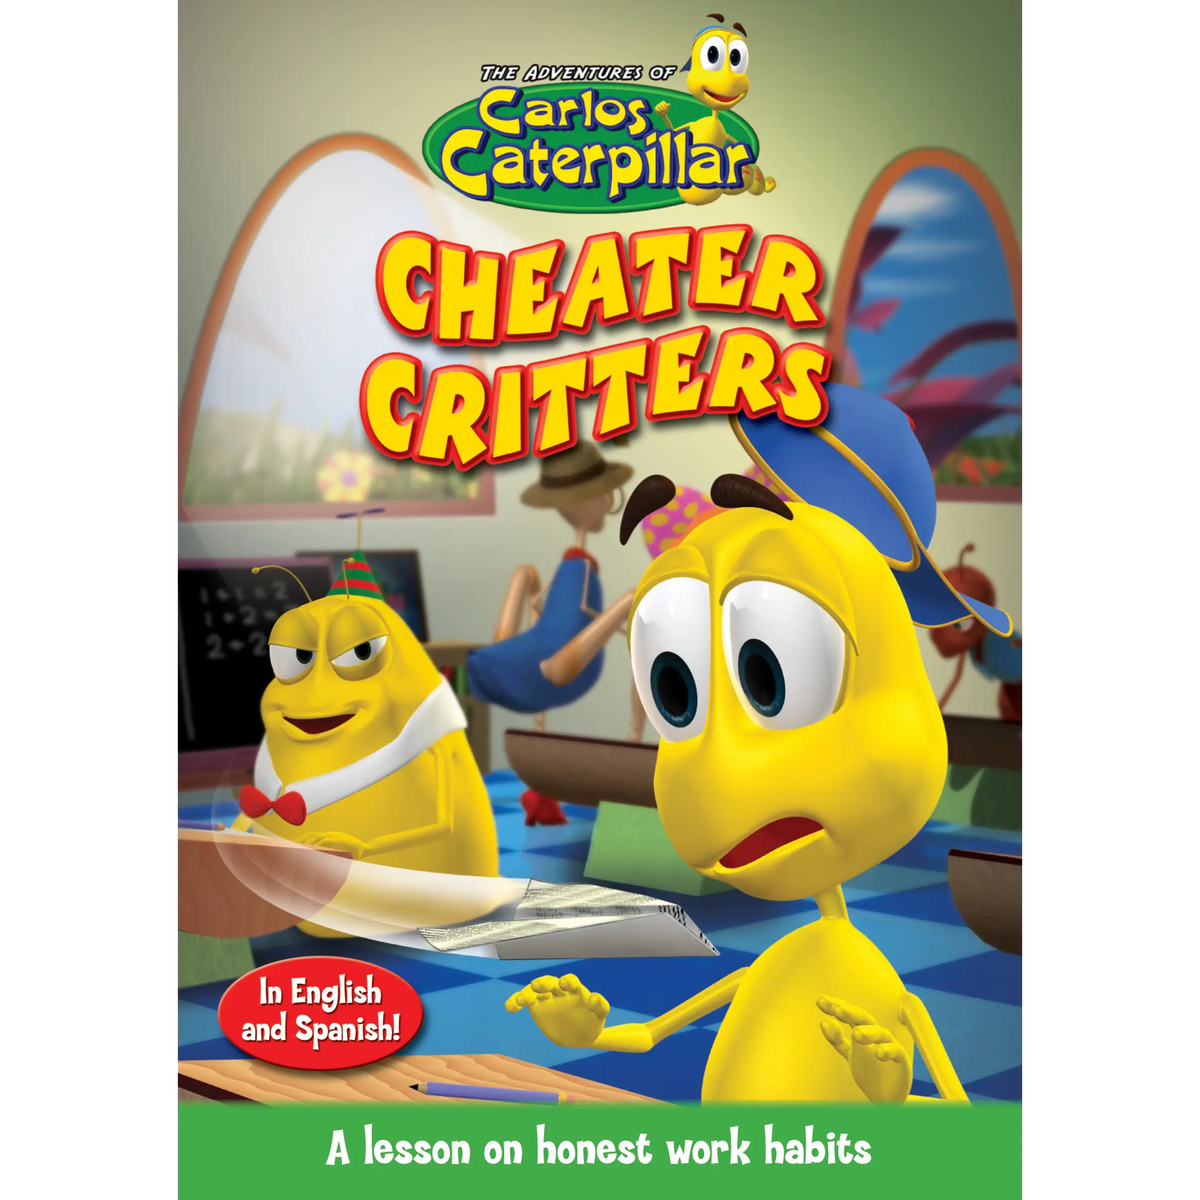 Carlos Caterpillar Episode 10: Cheater Critters - Video Download